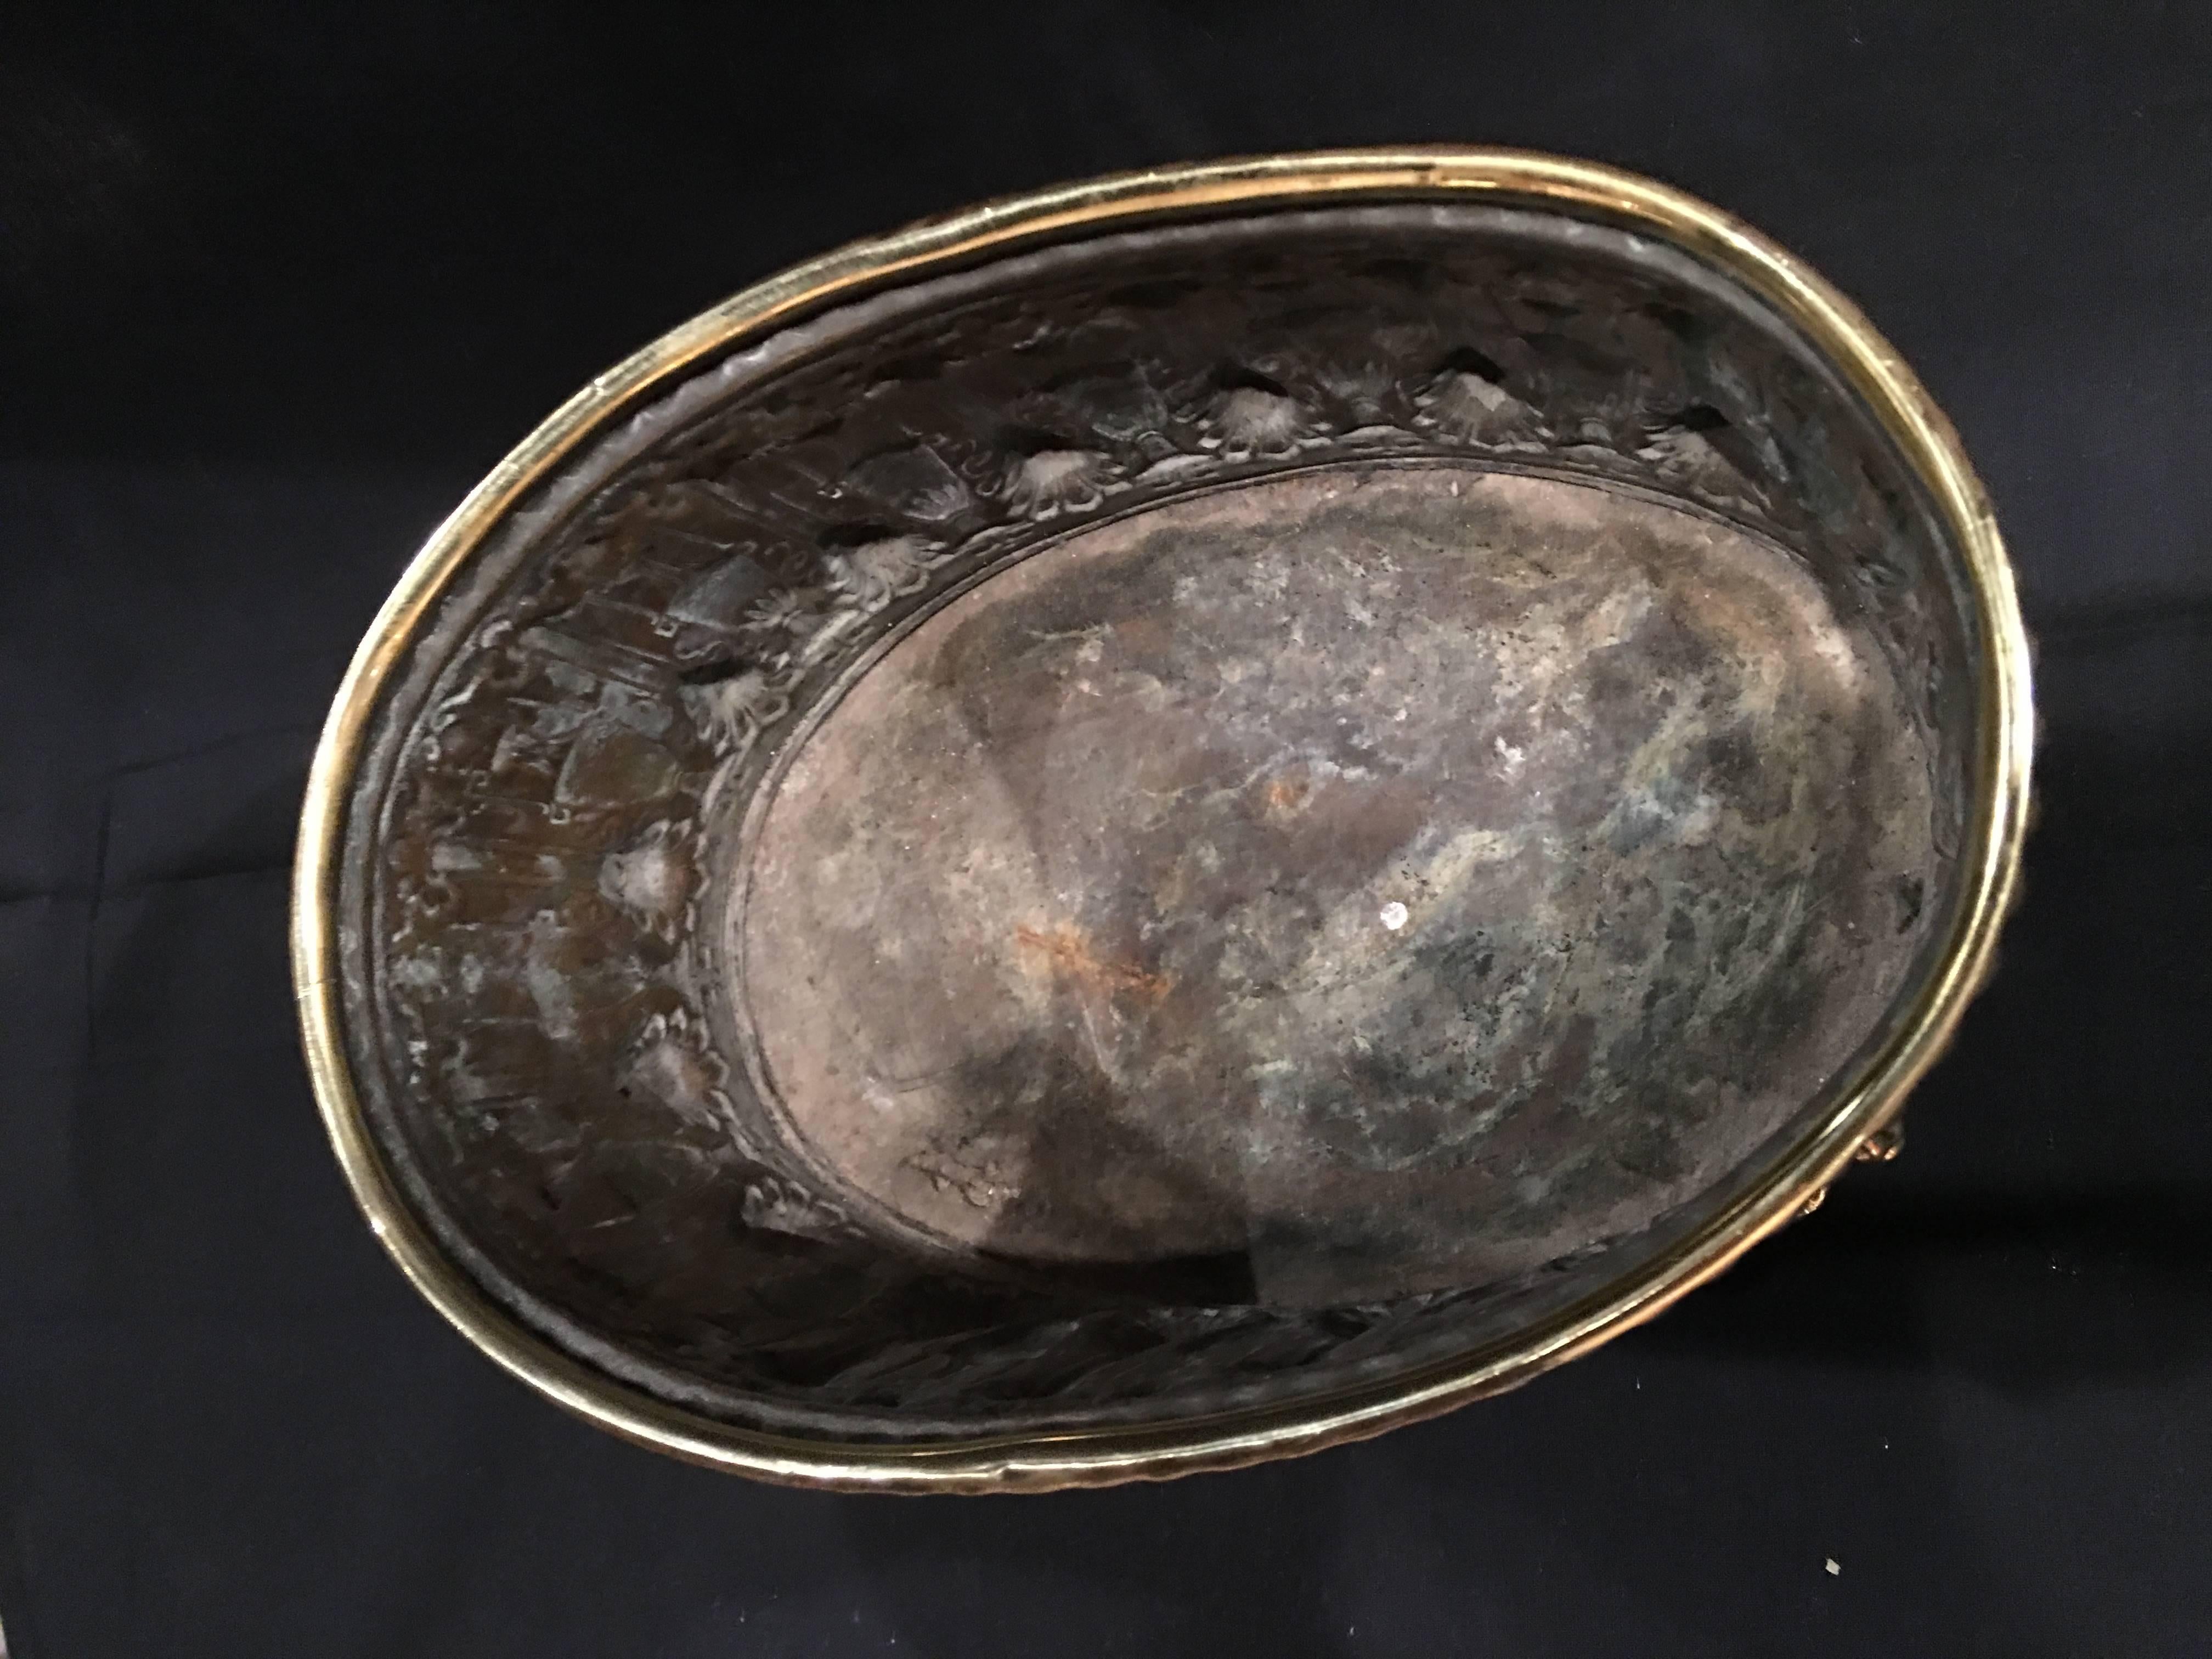 French Polished Brass Jardiniere or Container with Liner on Feet, 19th Century In Good Condition For Sale In Savannah, GA